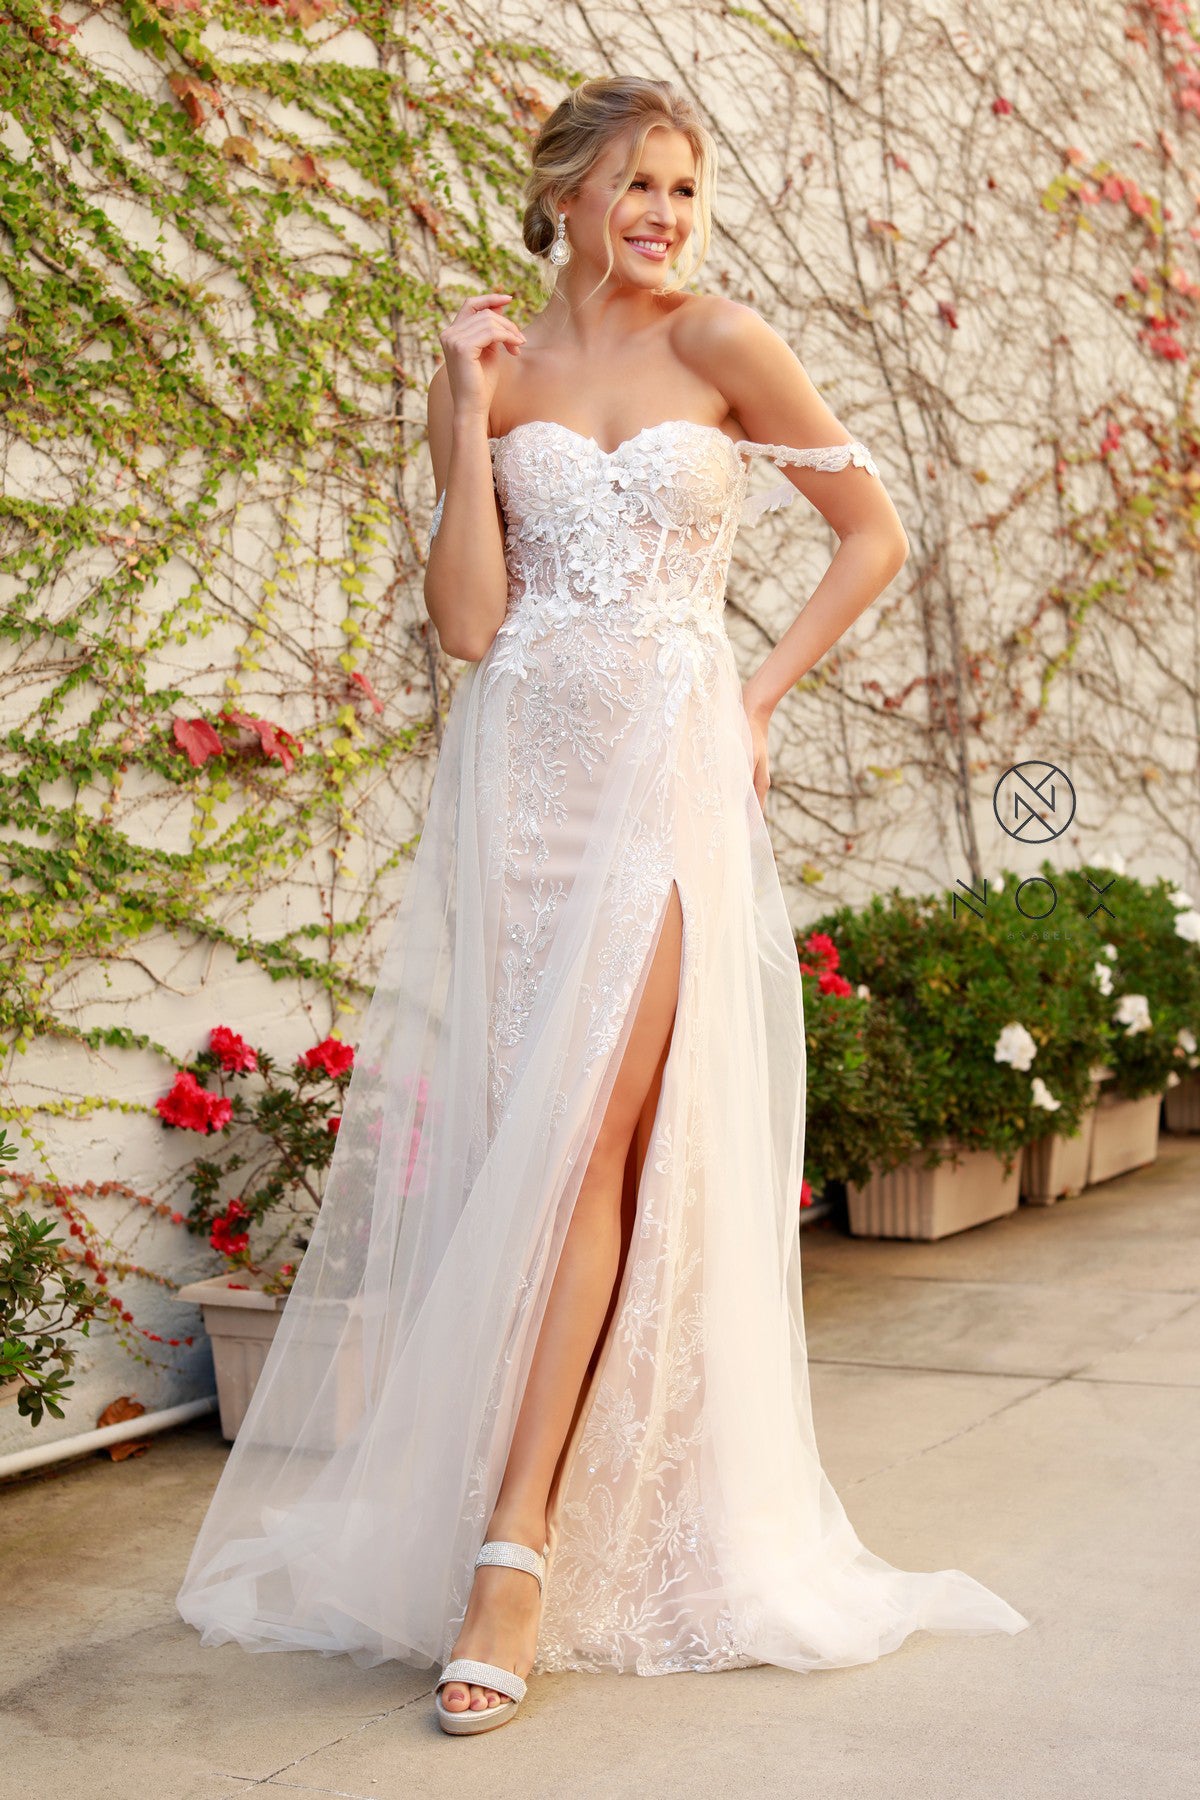 Whimsical Wishes Beaded Wedding Dress: Ivory/Champagne - Bella and Bloom Boutique